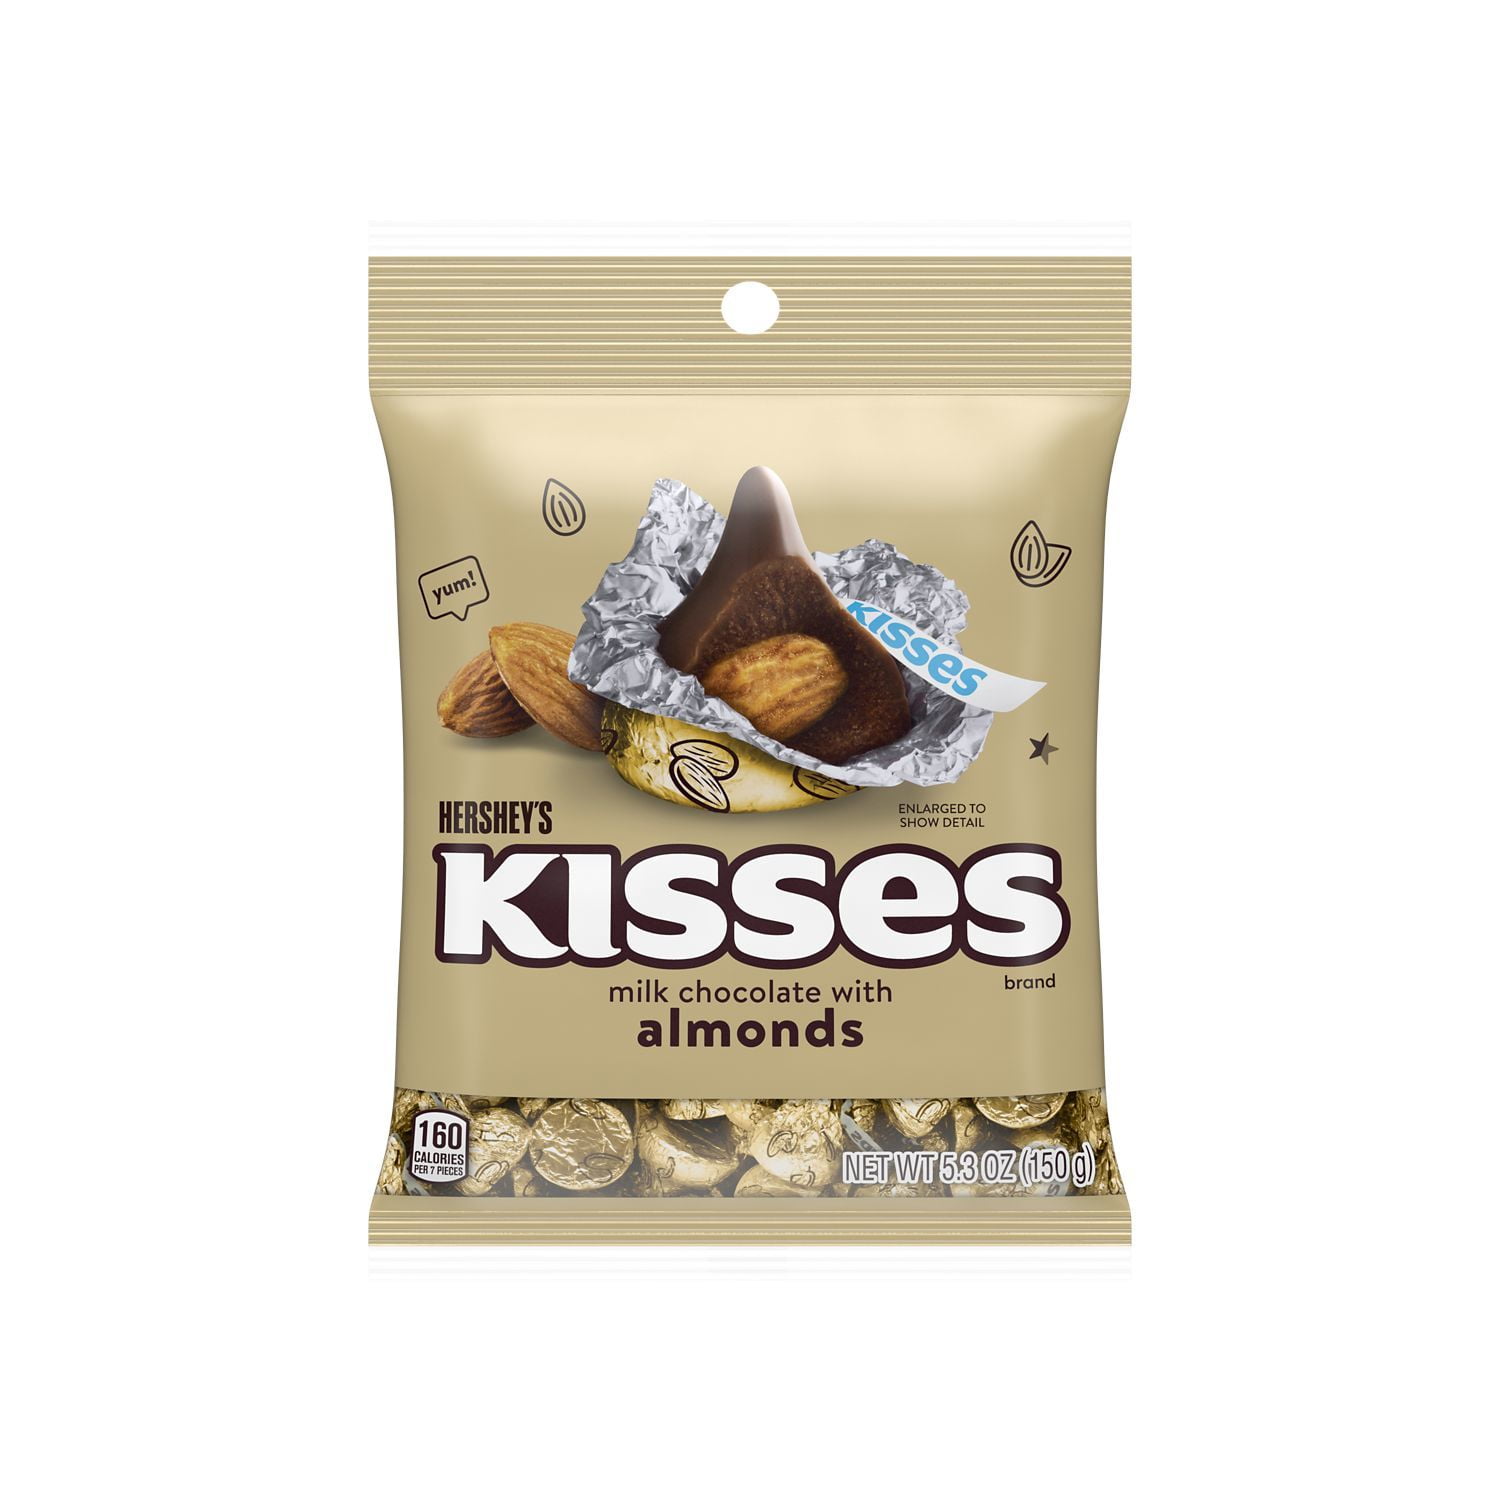 HERSHEY'S, KISSES Milk Chocolate with Almonds Candy, Individually Wrapped, 5.3 oz, Bag